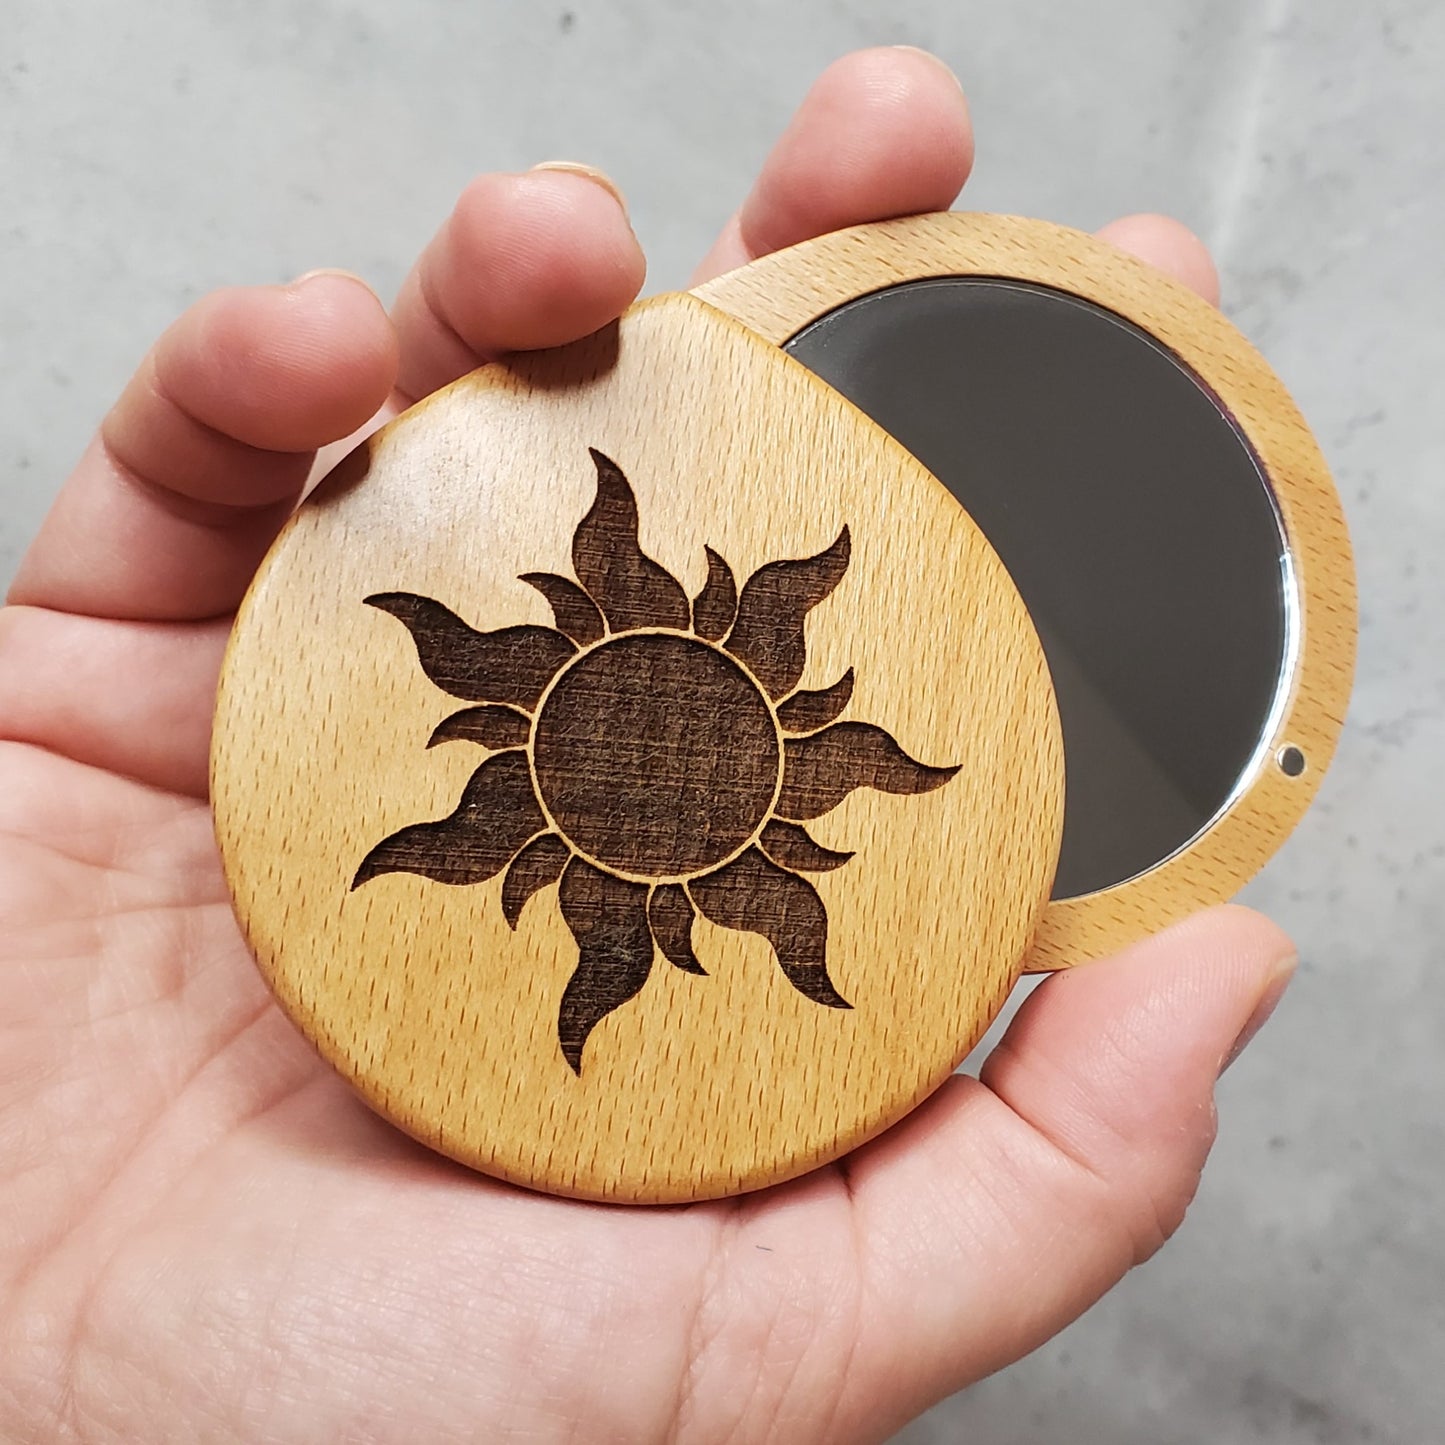 Pocket mirror with sun engraved on the top, round shape, twist to open